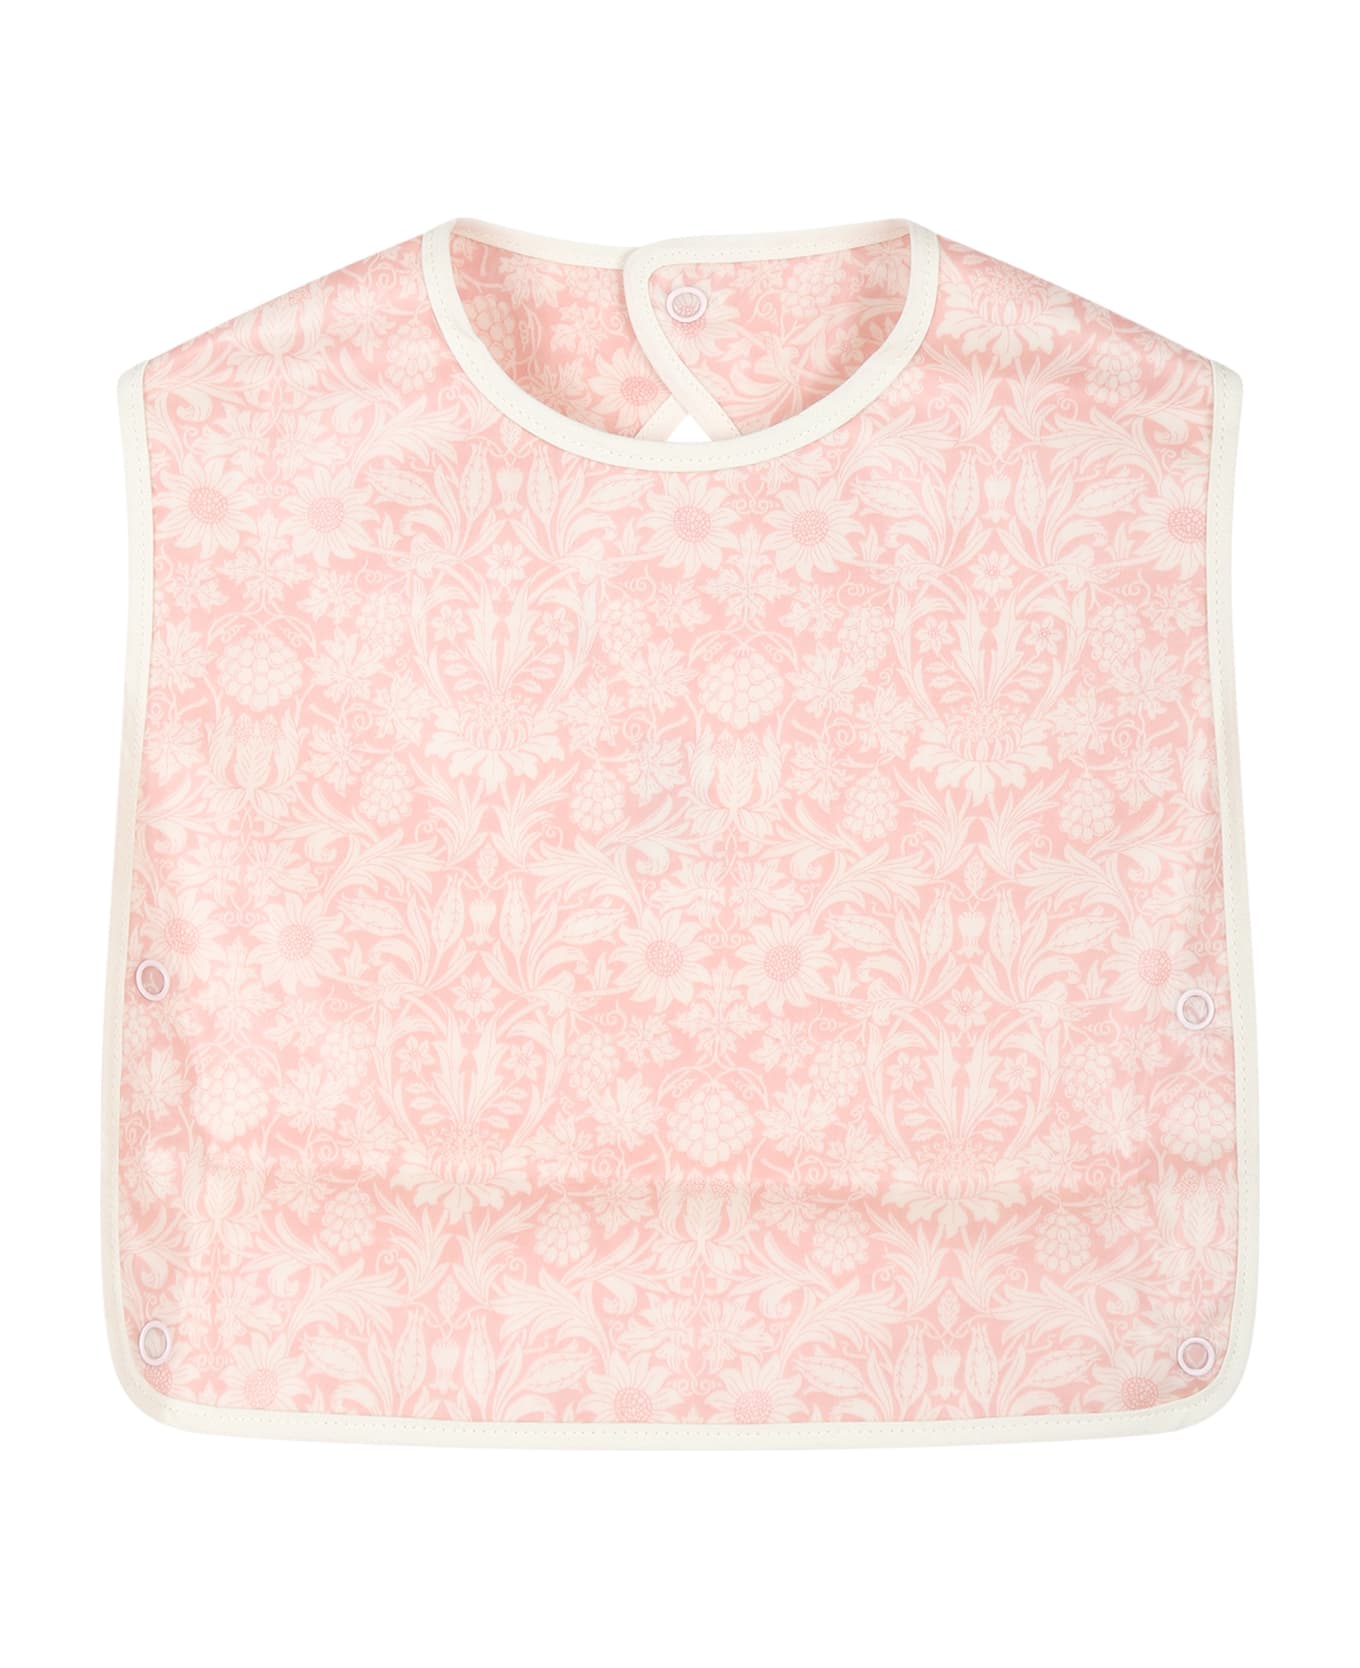 Bonpoint Pink Bib For Baby Girl With Flower Print - Rosa